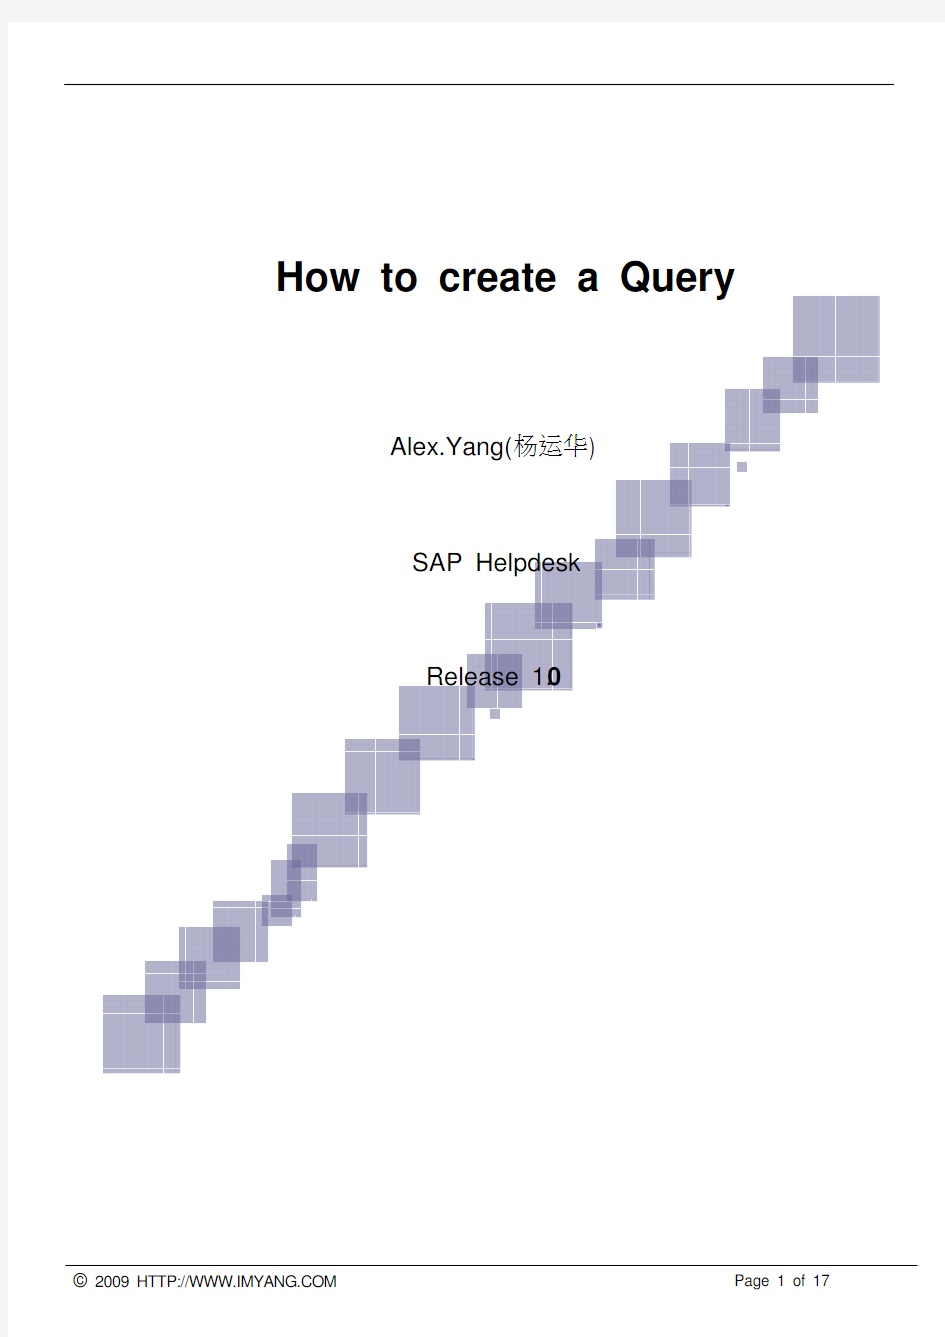 How to Create a Query